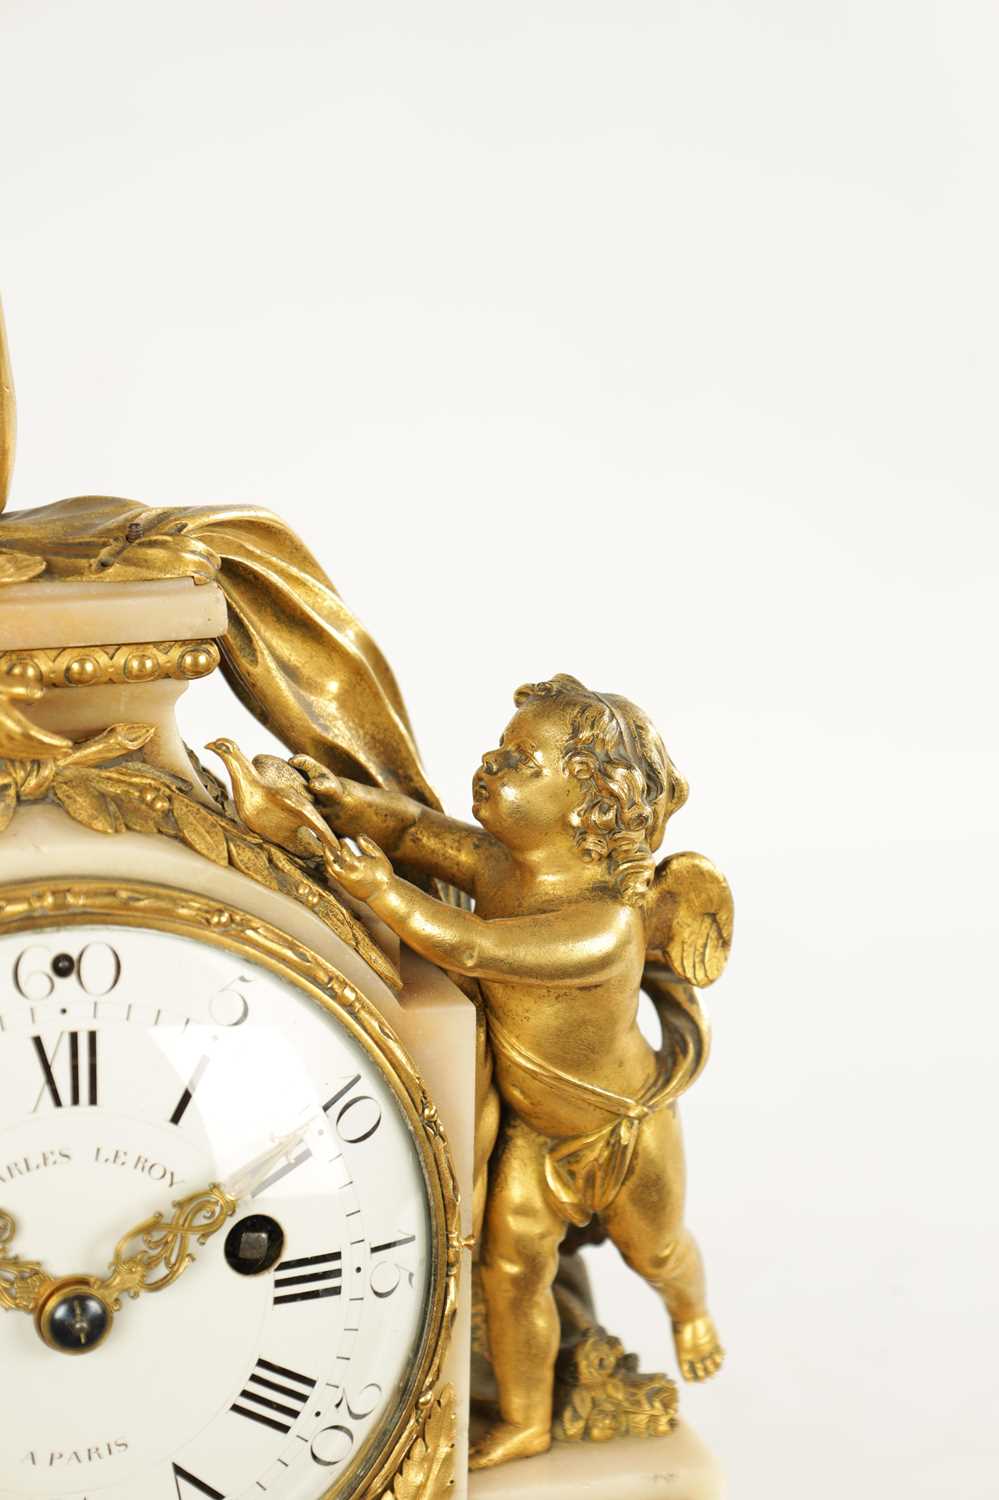 CHARLES LEROY, A PARIS. A FRENCH LOUIS XVI ORMOLU AND MARBLE FIGURAL MANTEL CLOCK - Image 4 of 11